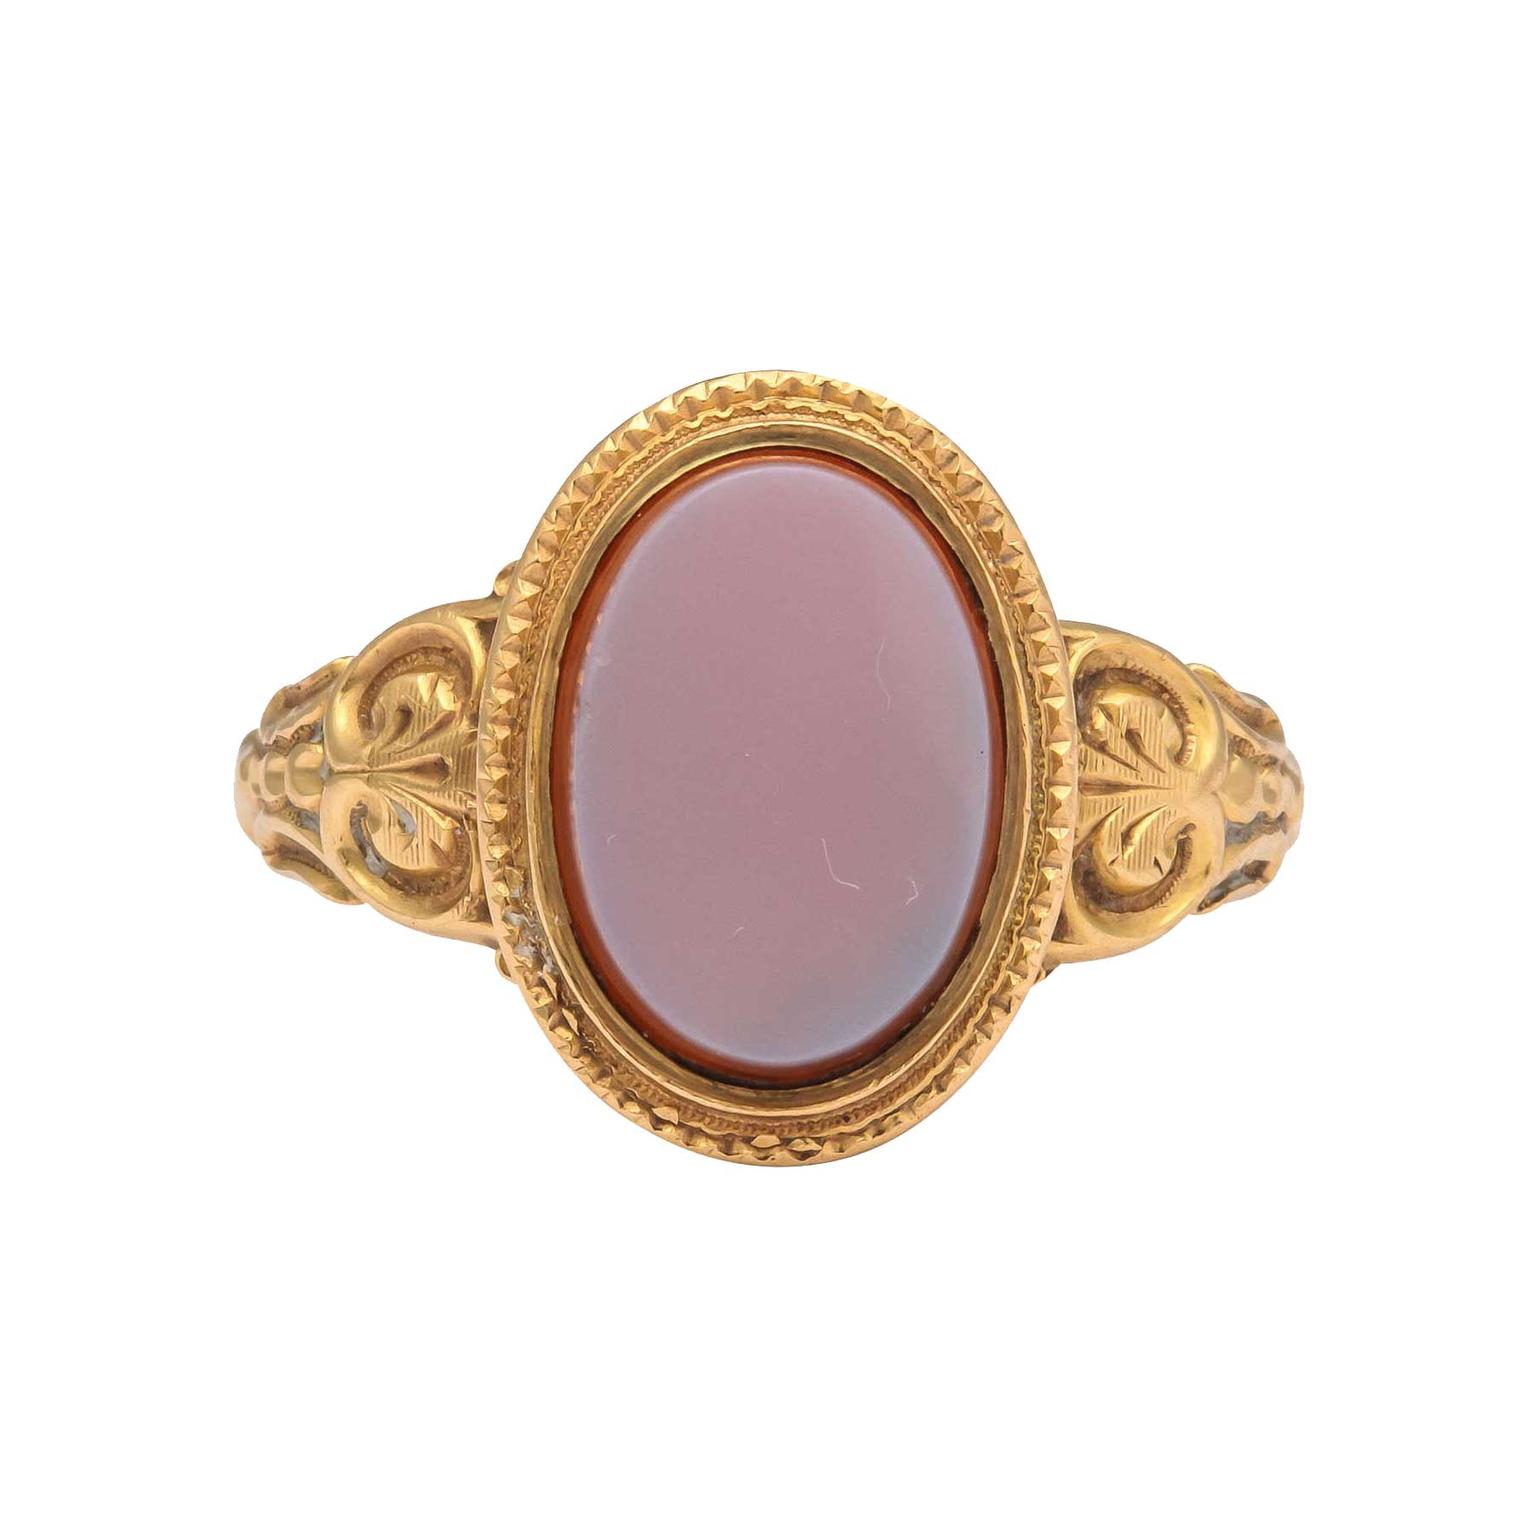 Marie E Betteley ring set with oval agate